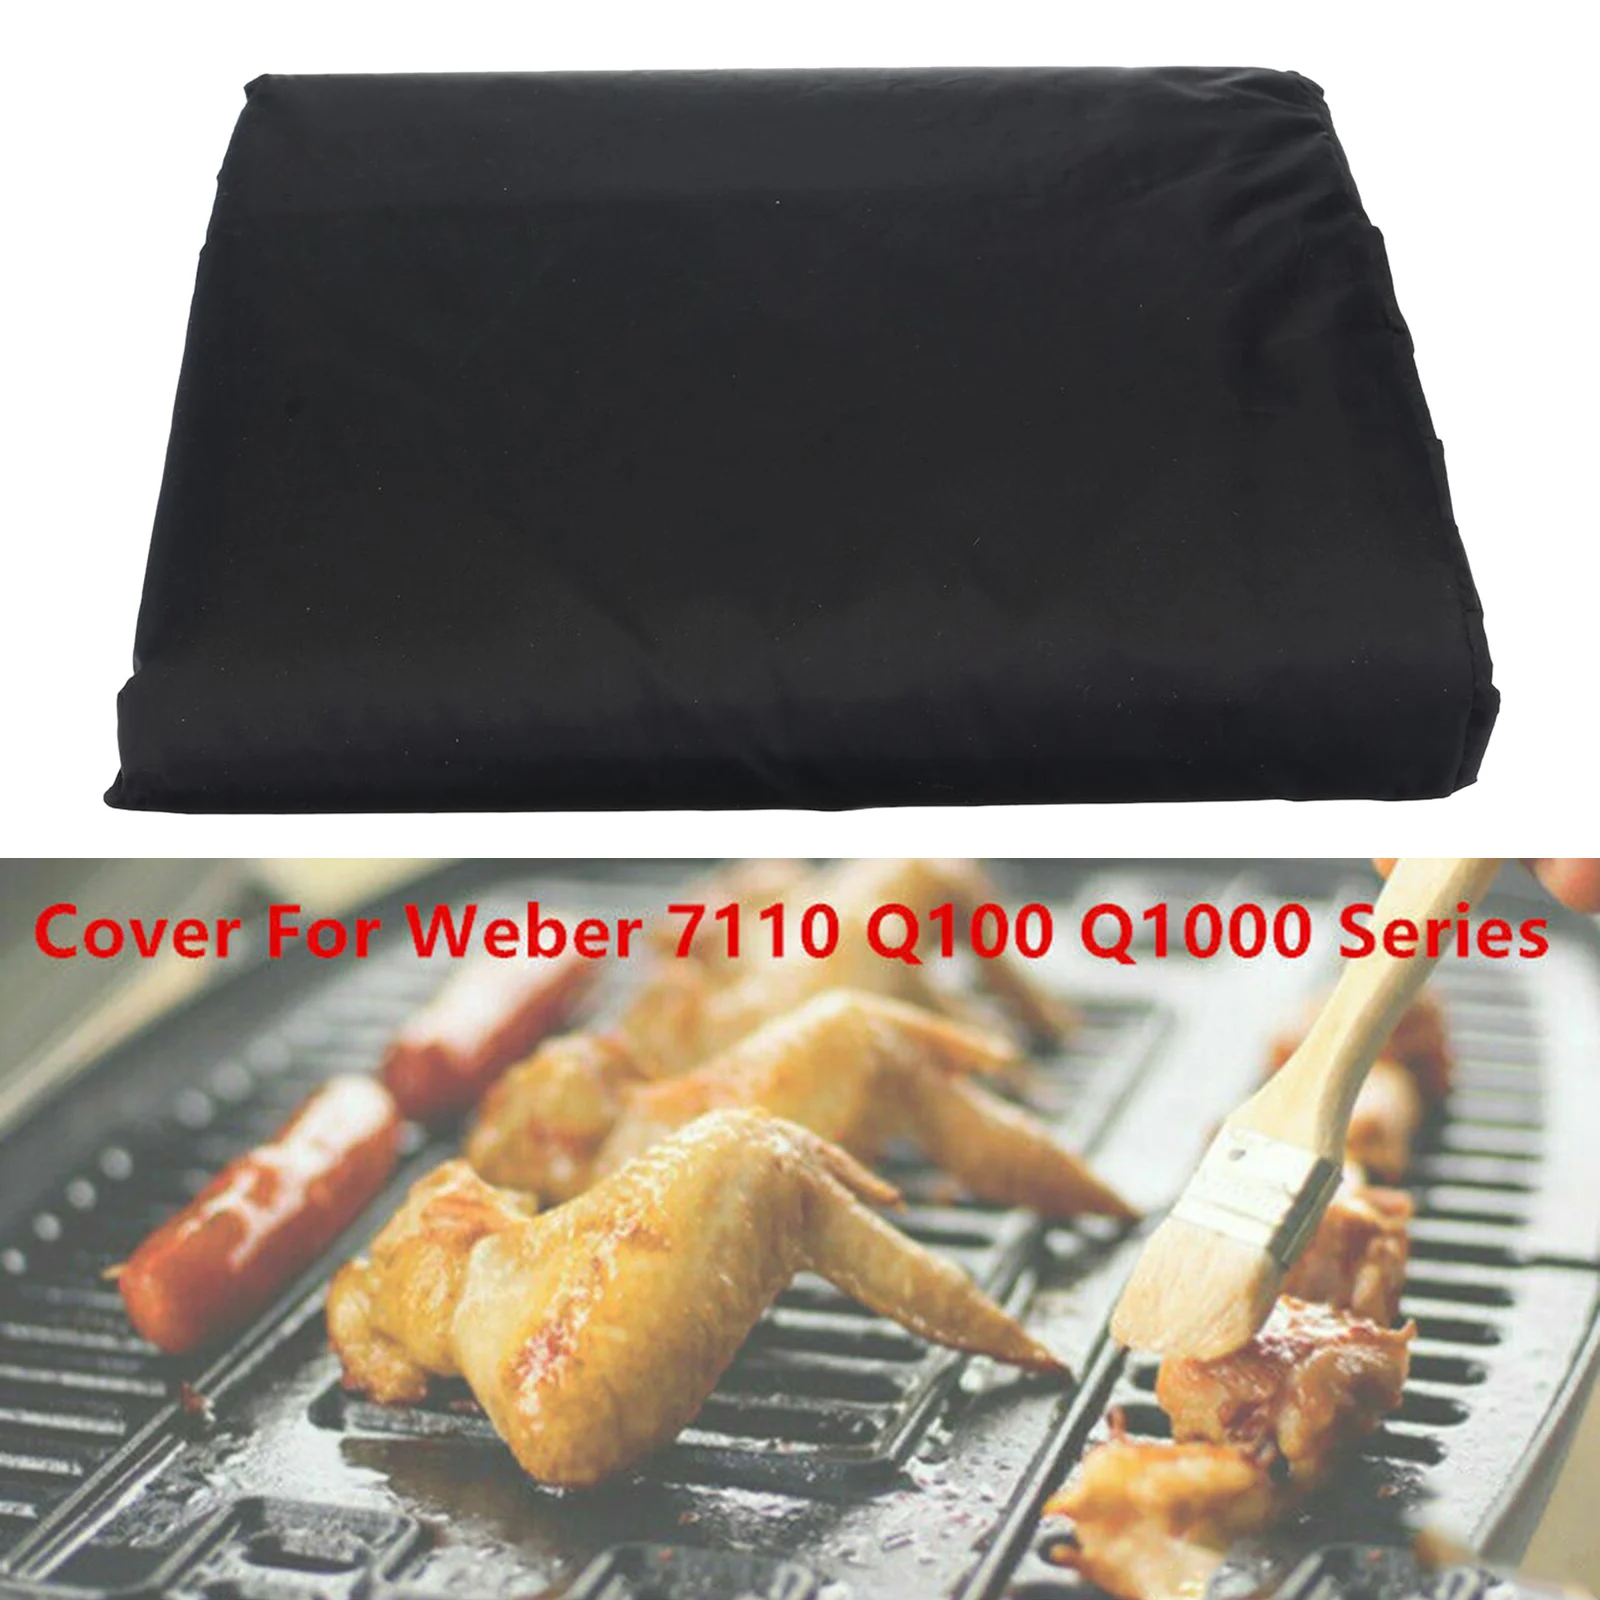 BBQ Stove Grill Cover Waterproof Dustproof UV Resistant For Weber Q100 Q1000 